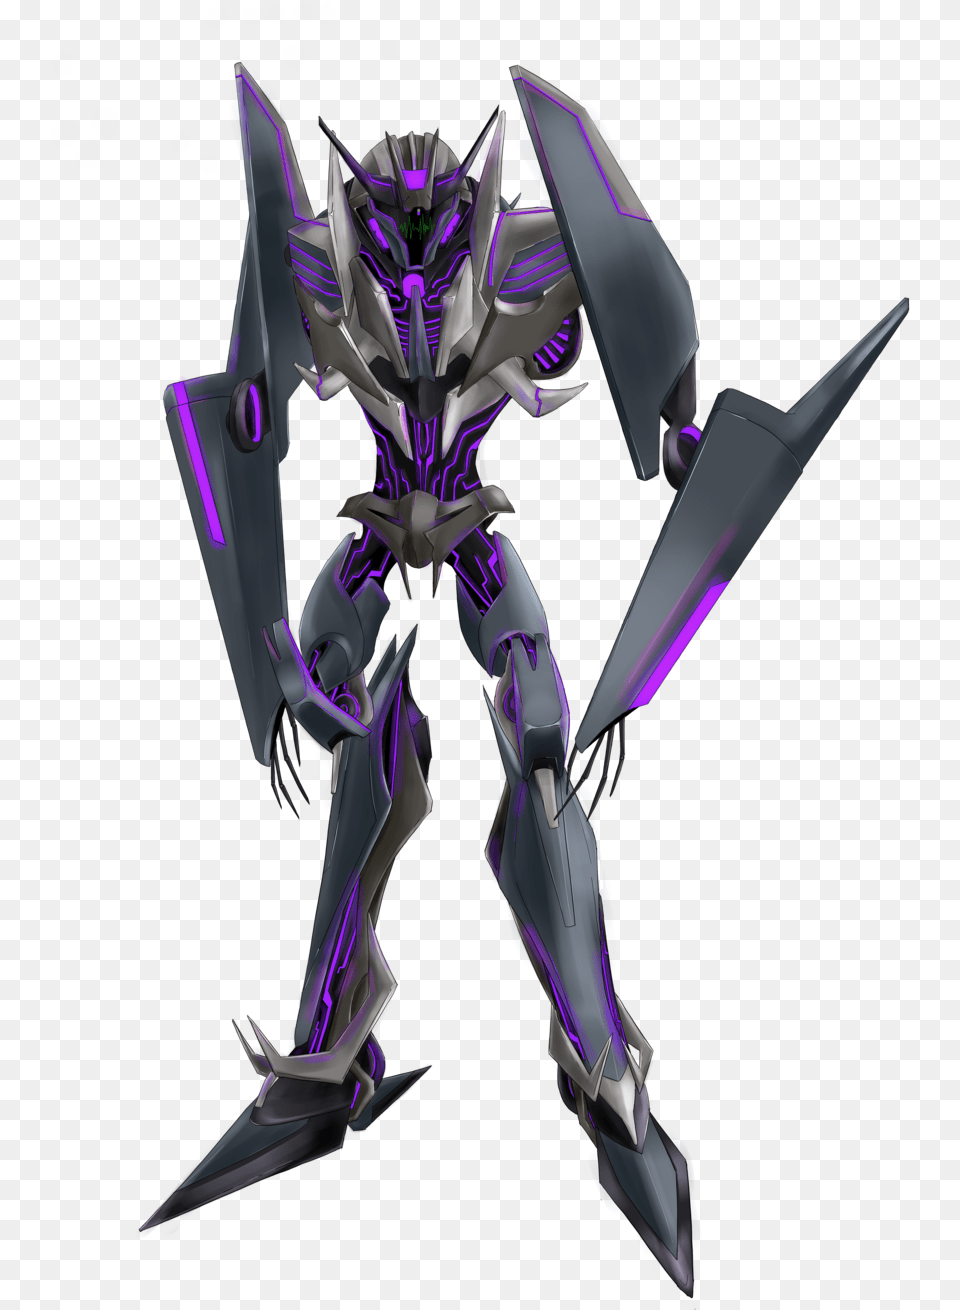 Prime Soundwave By Bumblebeeisbomb Transformers Prime Sound Wave In Transformers Prime, Aircraft, Airplane, Transportation, Vehicle Free Transparent Png